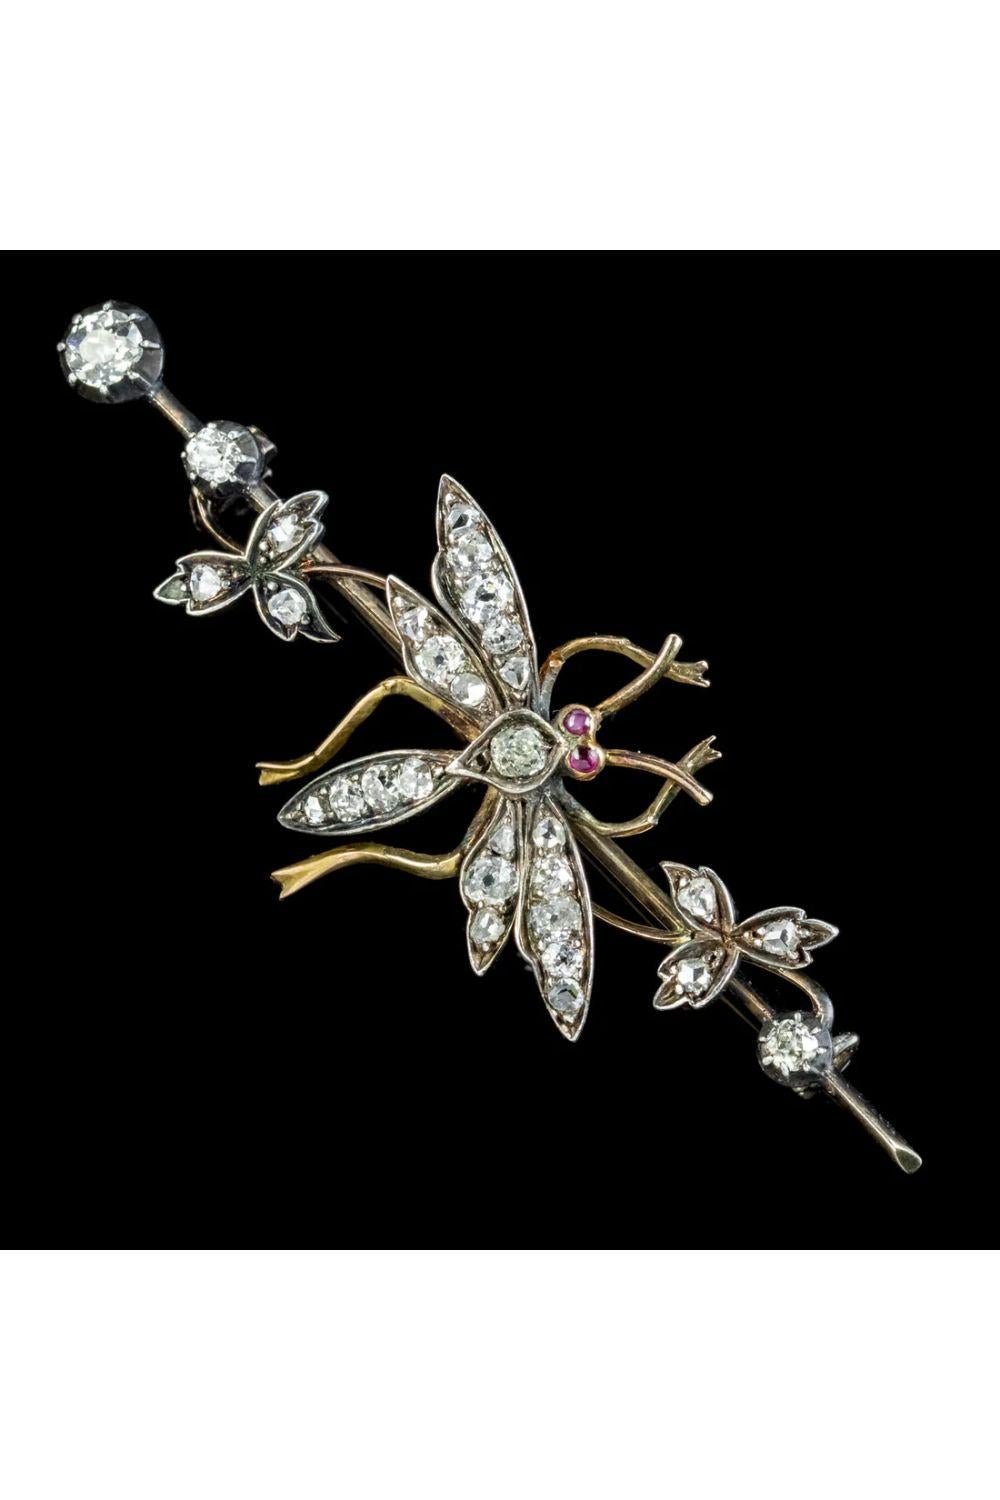 A stunning Antique late Victorian brooch featuring a large, winged insect decorated with sparkling Old Mine cut Diamonds and red cabochon Ruby eyes. It’s perched on a long bar set with further Mine cuts and leaves and can be turned left or right on